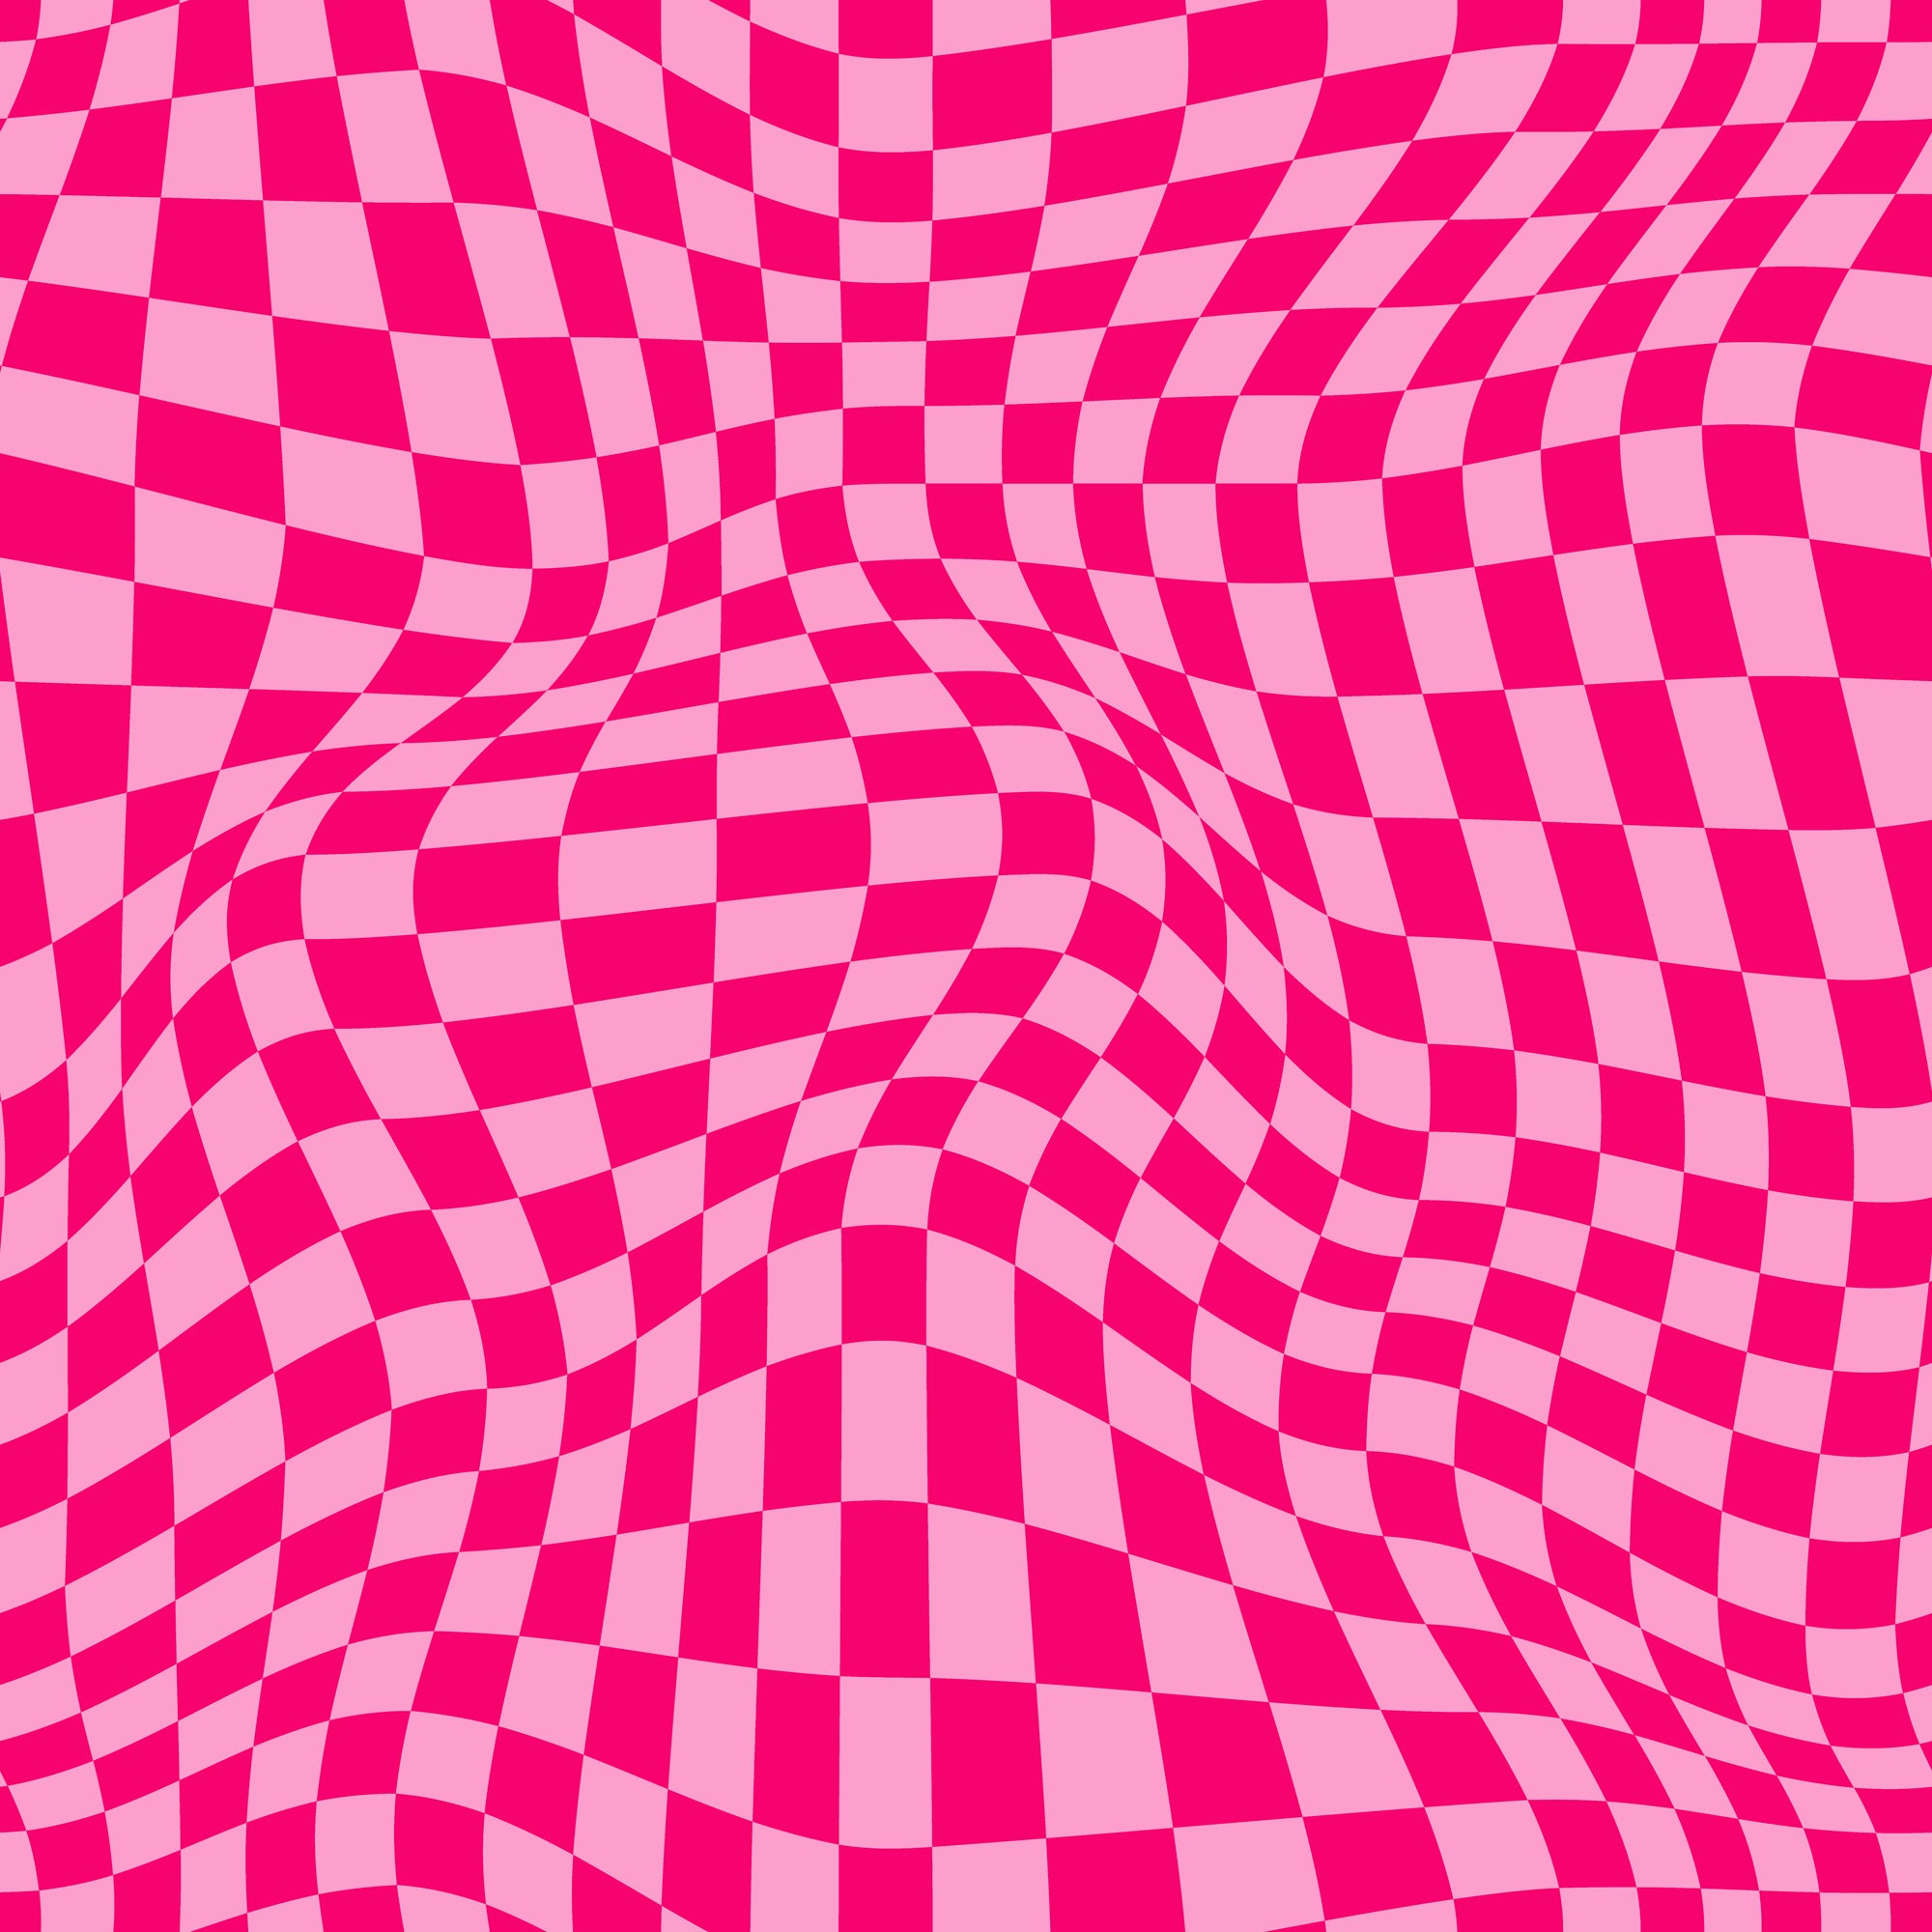 948928 Checkered Background Images Stock Photos  Vectors  Shutterstock